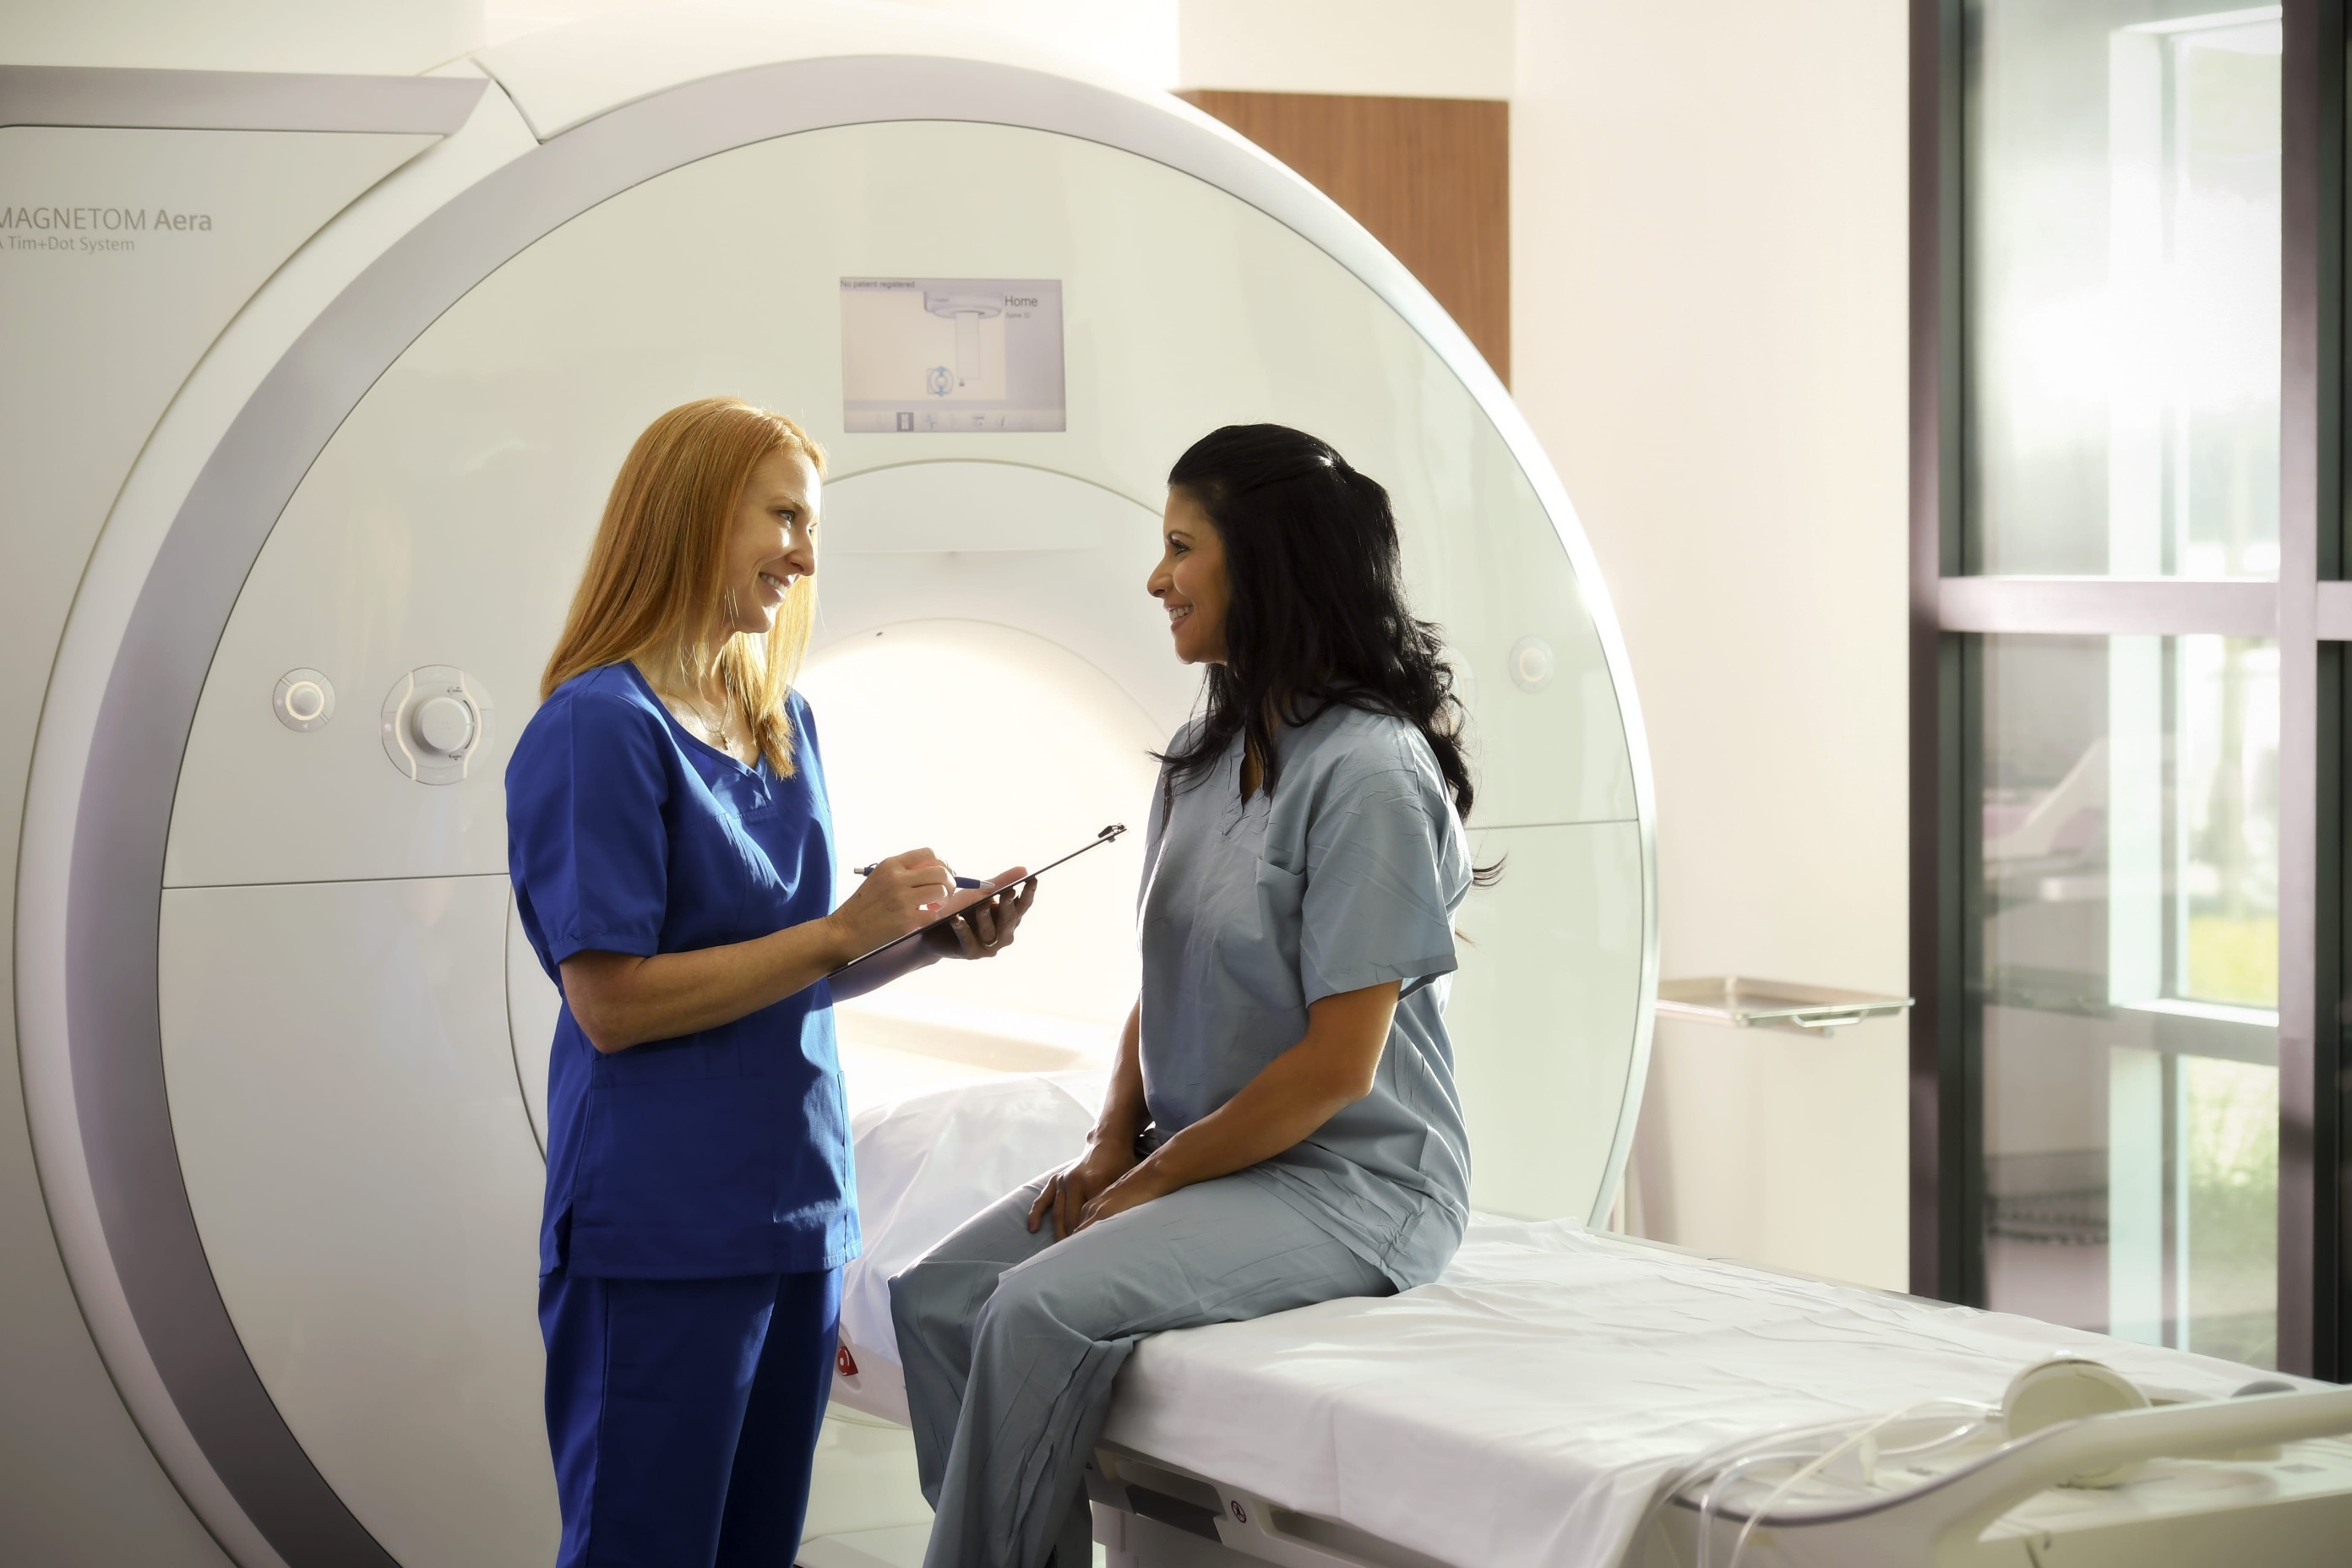 A GI cancer patient receives a second opinion from a cancer care specialist in front of a CT scan machine